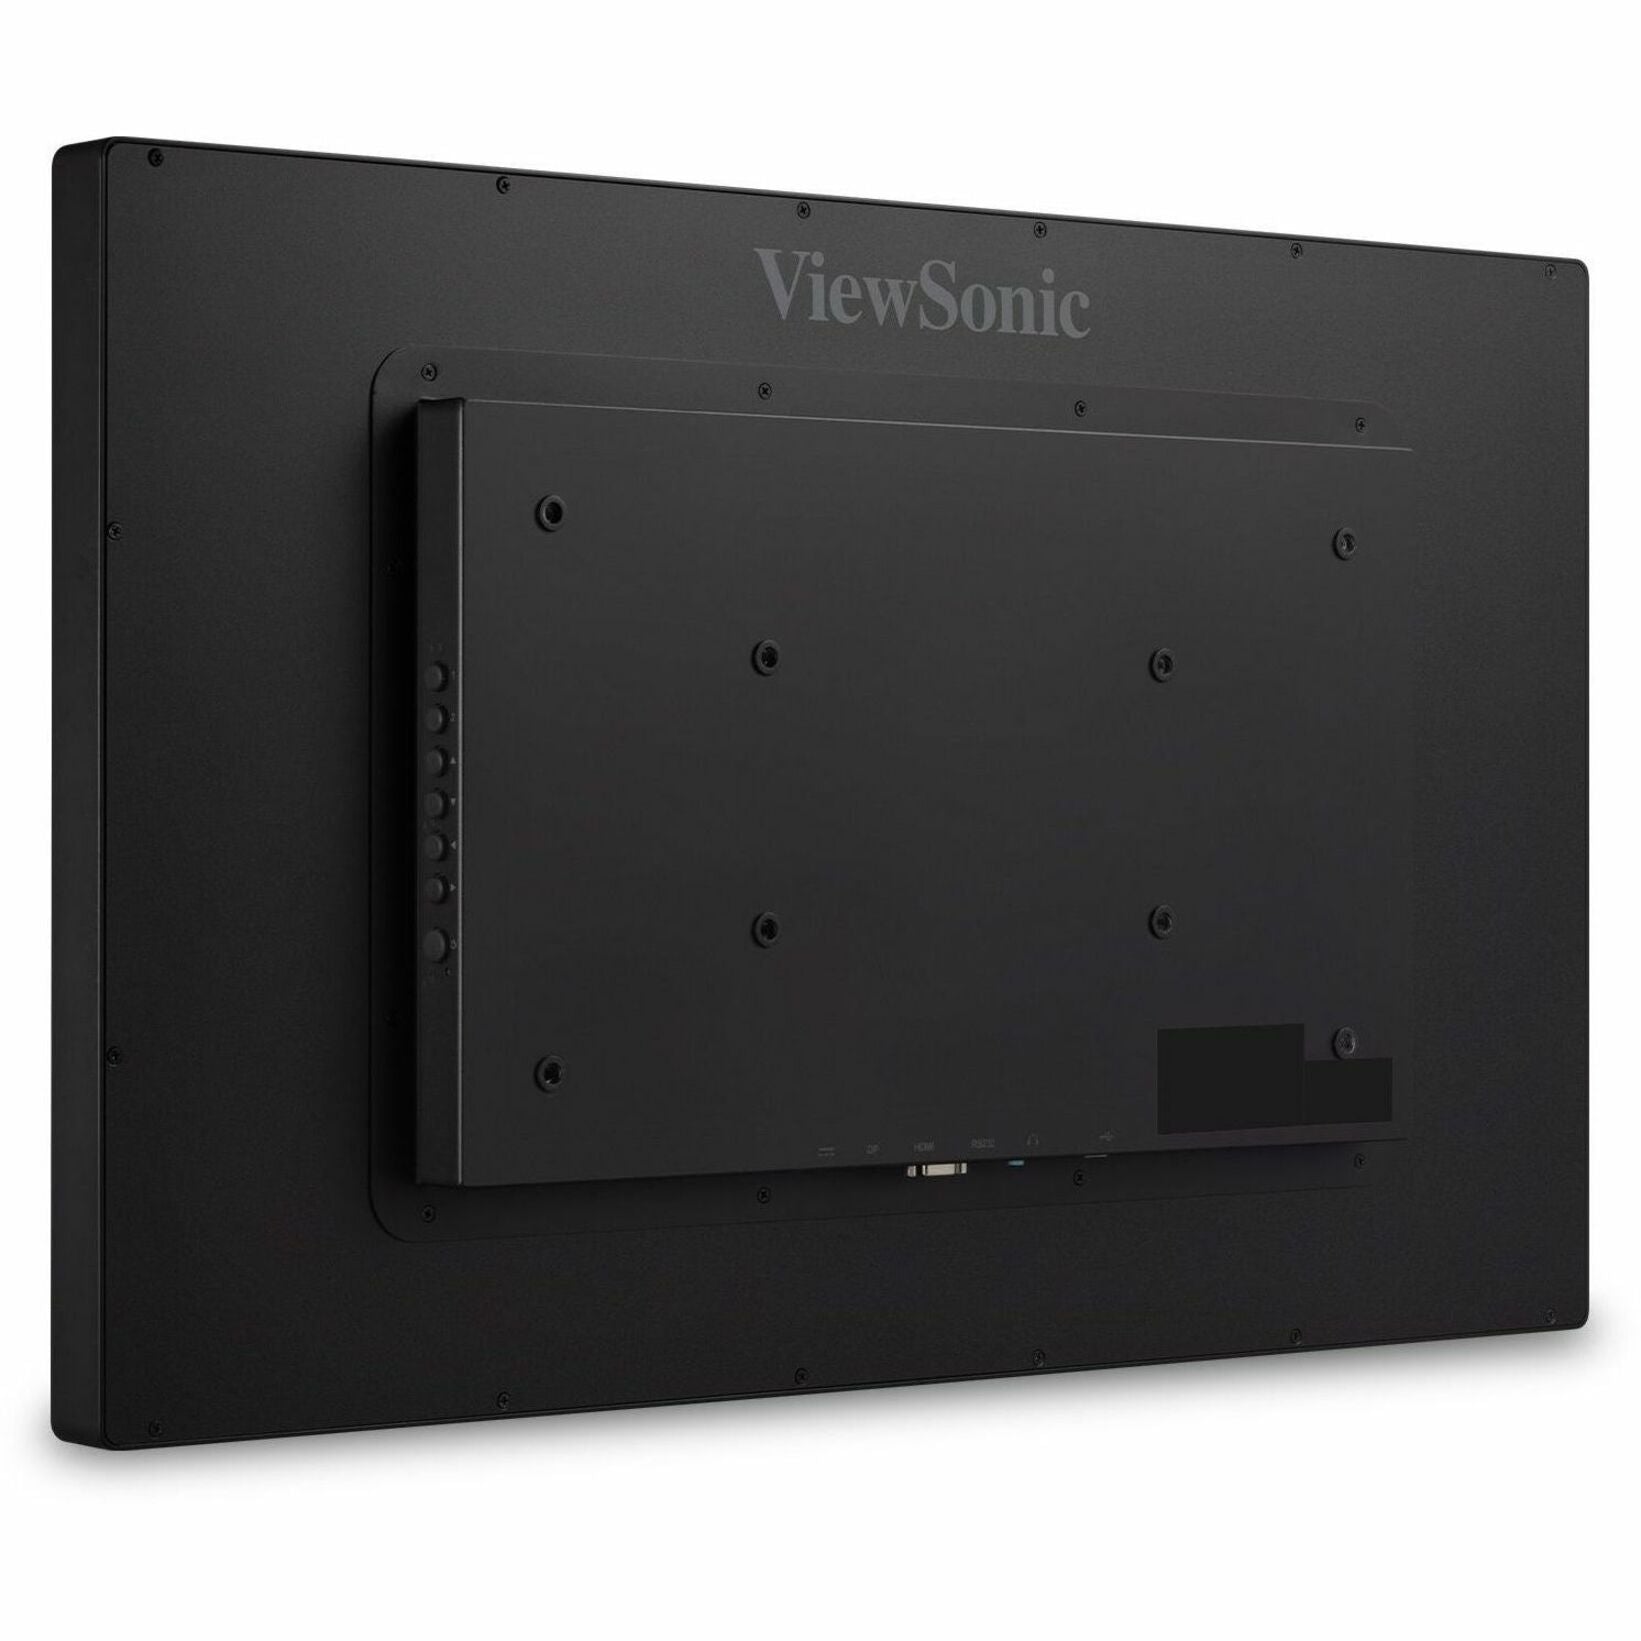 ViewSonic TD3207 32" LCD FHD Touch Screen Monitor, 10-Point Touch, HDMI, DisplayPort